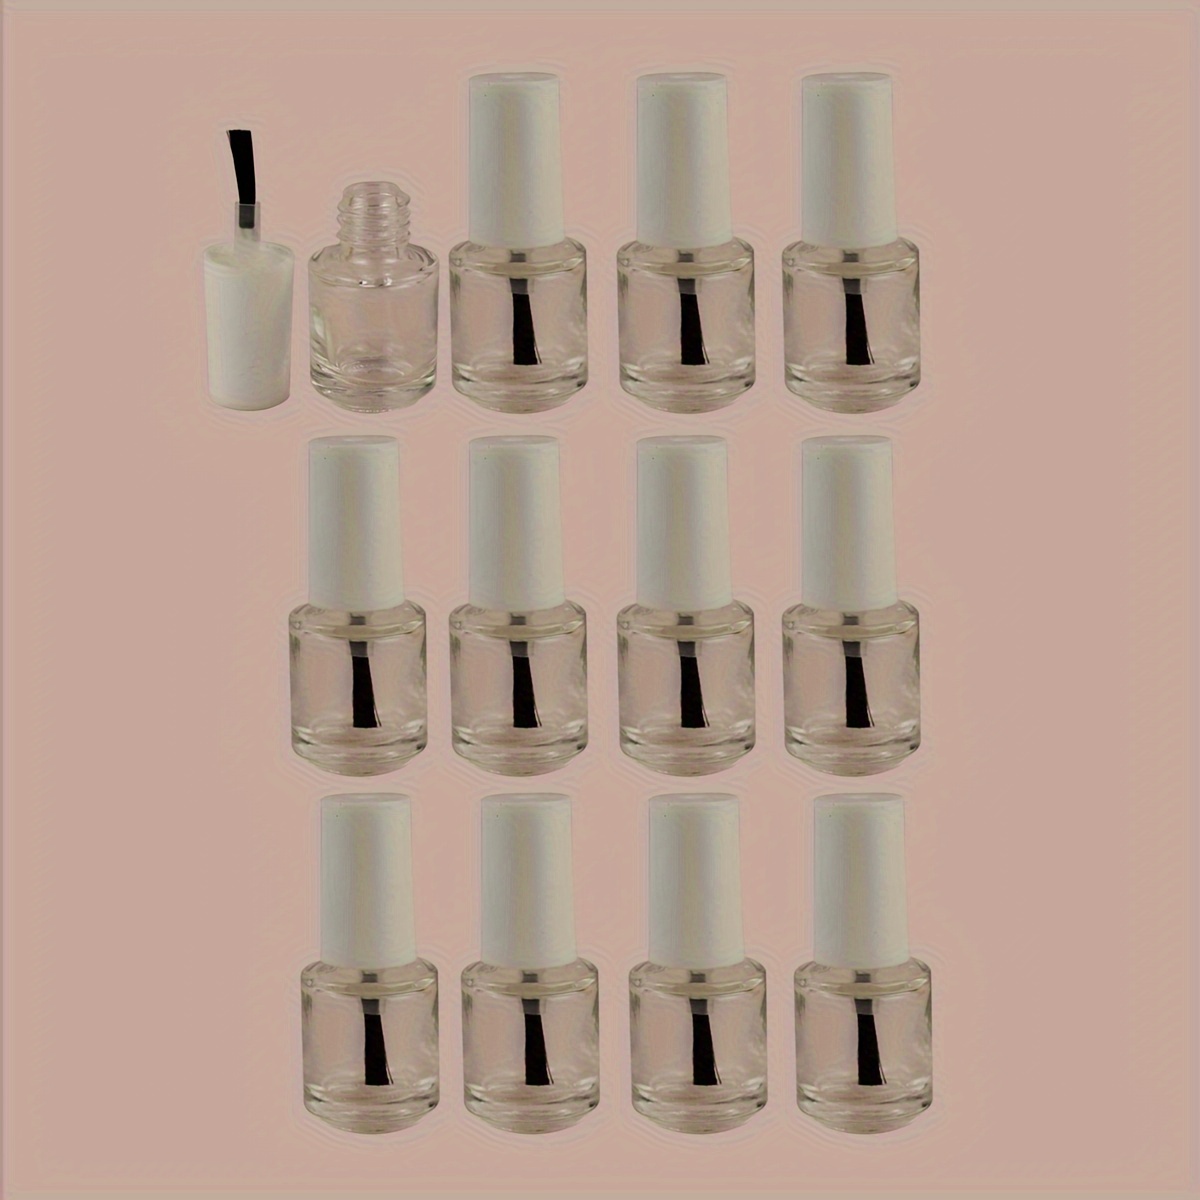 

12pcs 5ml Glass Empty Nail Polish Bottles With Brush & Cap, Round Clear Nail Polish Containers, Refillable Cosmetic Sample Bottles For Nail Art - Travel Accessories